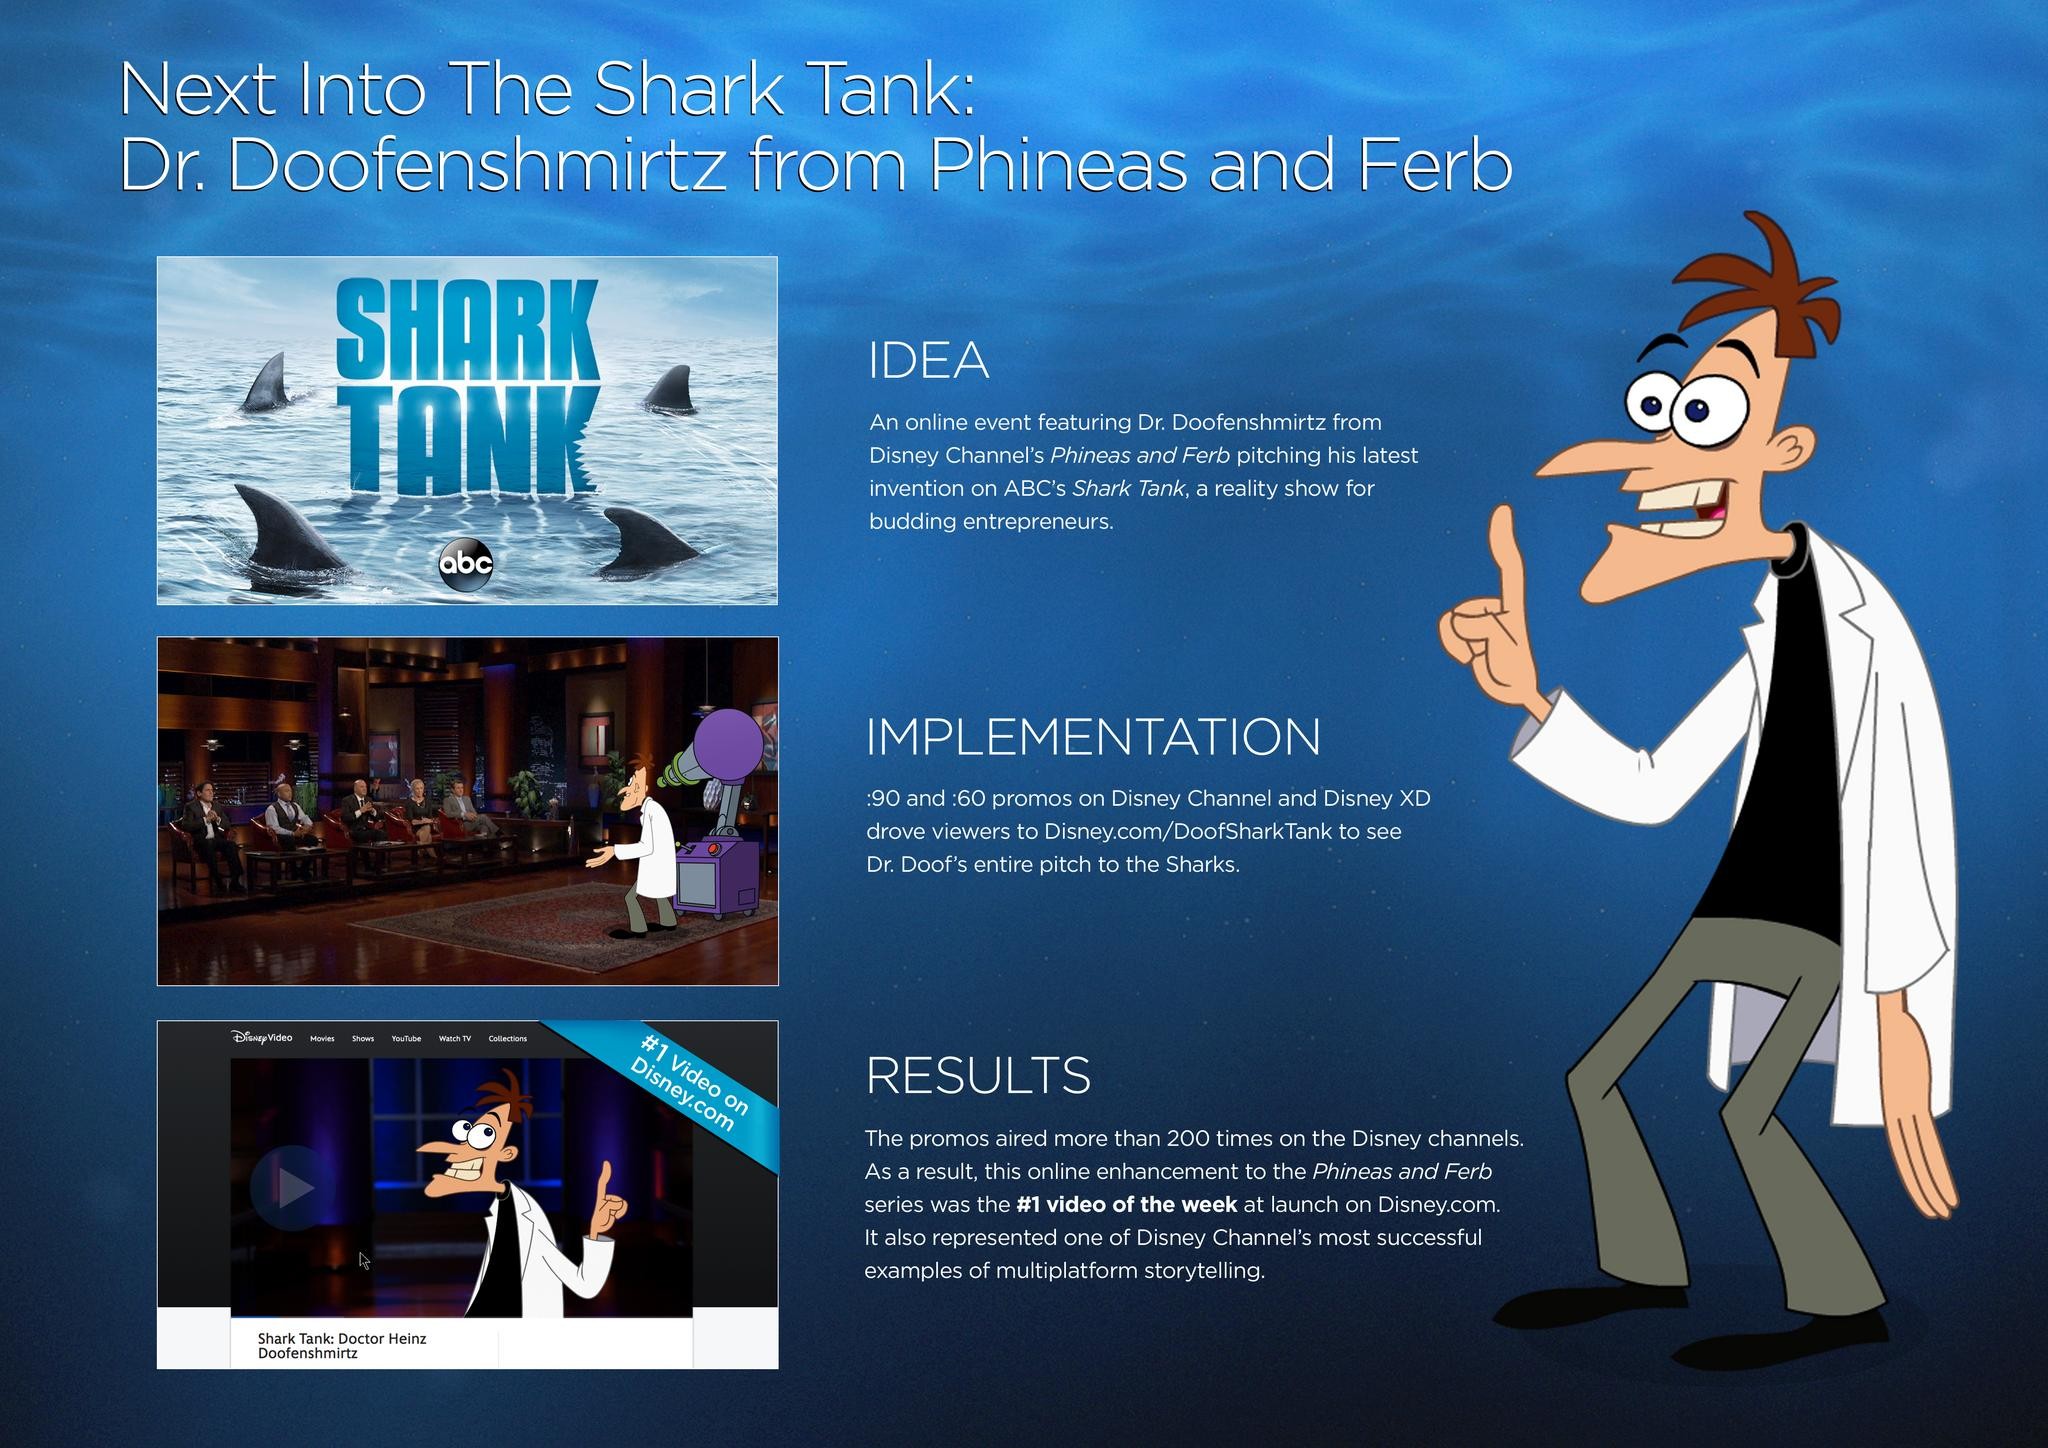 NEXT INTO THE SHARK TANK: DR. DOOFENSHMIRTZ FROM PHINEAS AND FERB